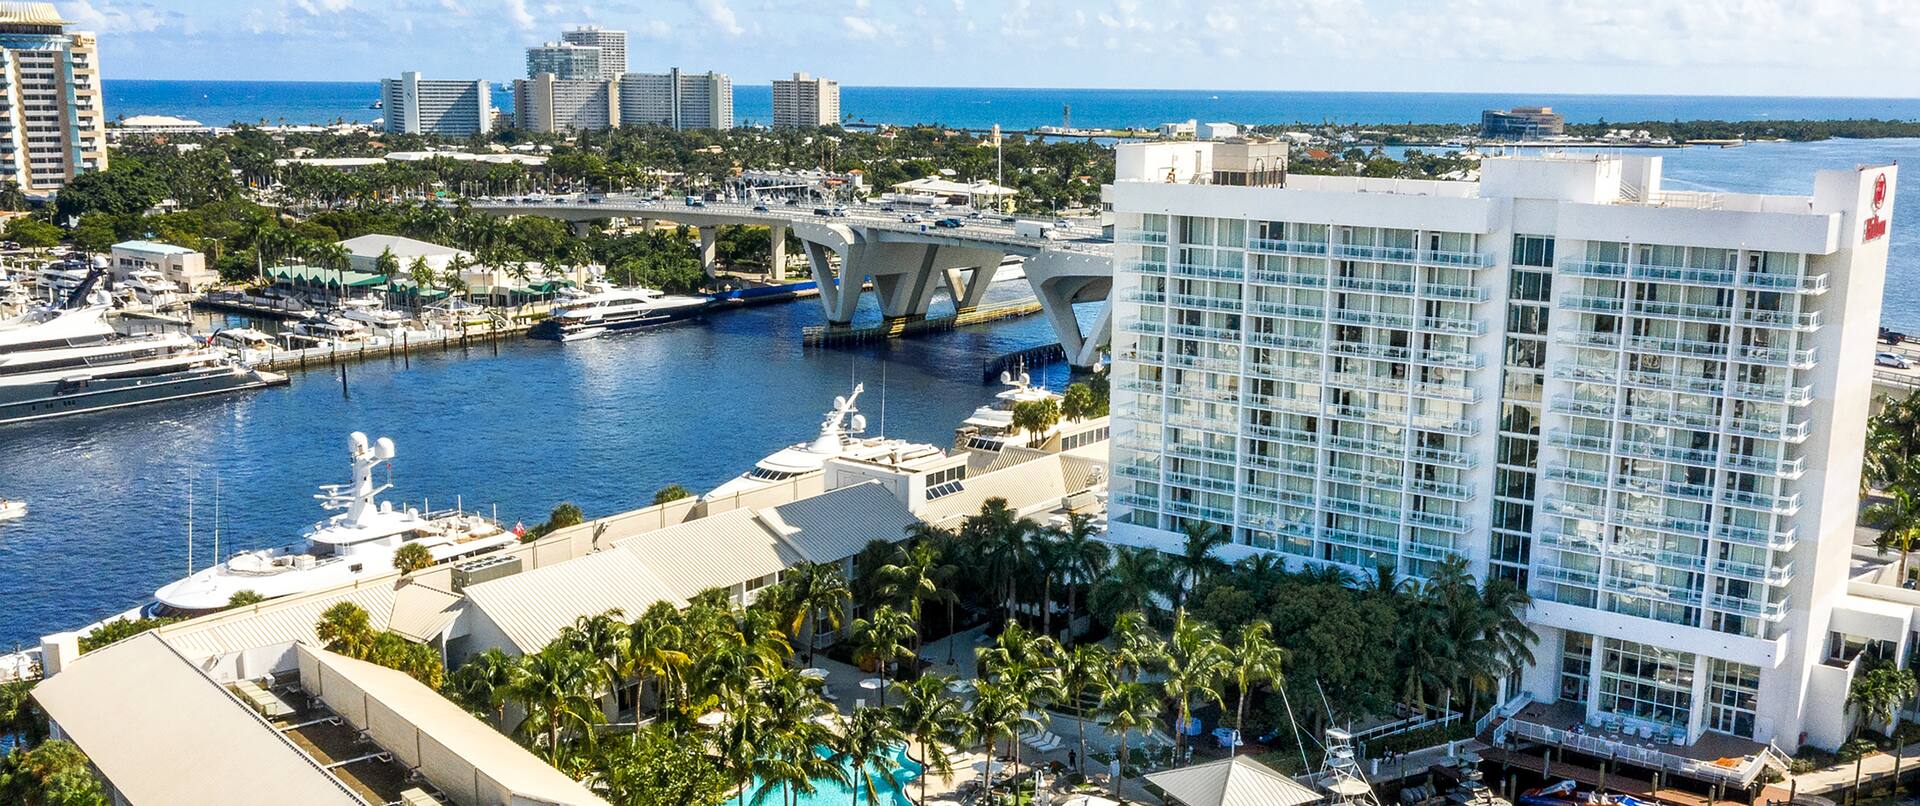 Aerial View of Hilton Hotel Exterior by the Water